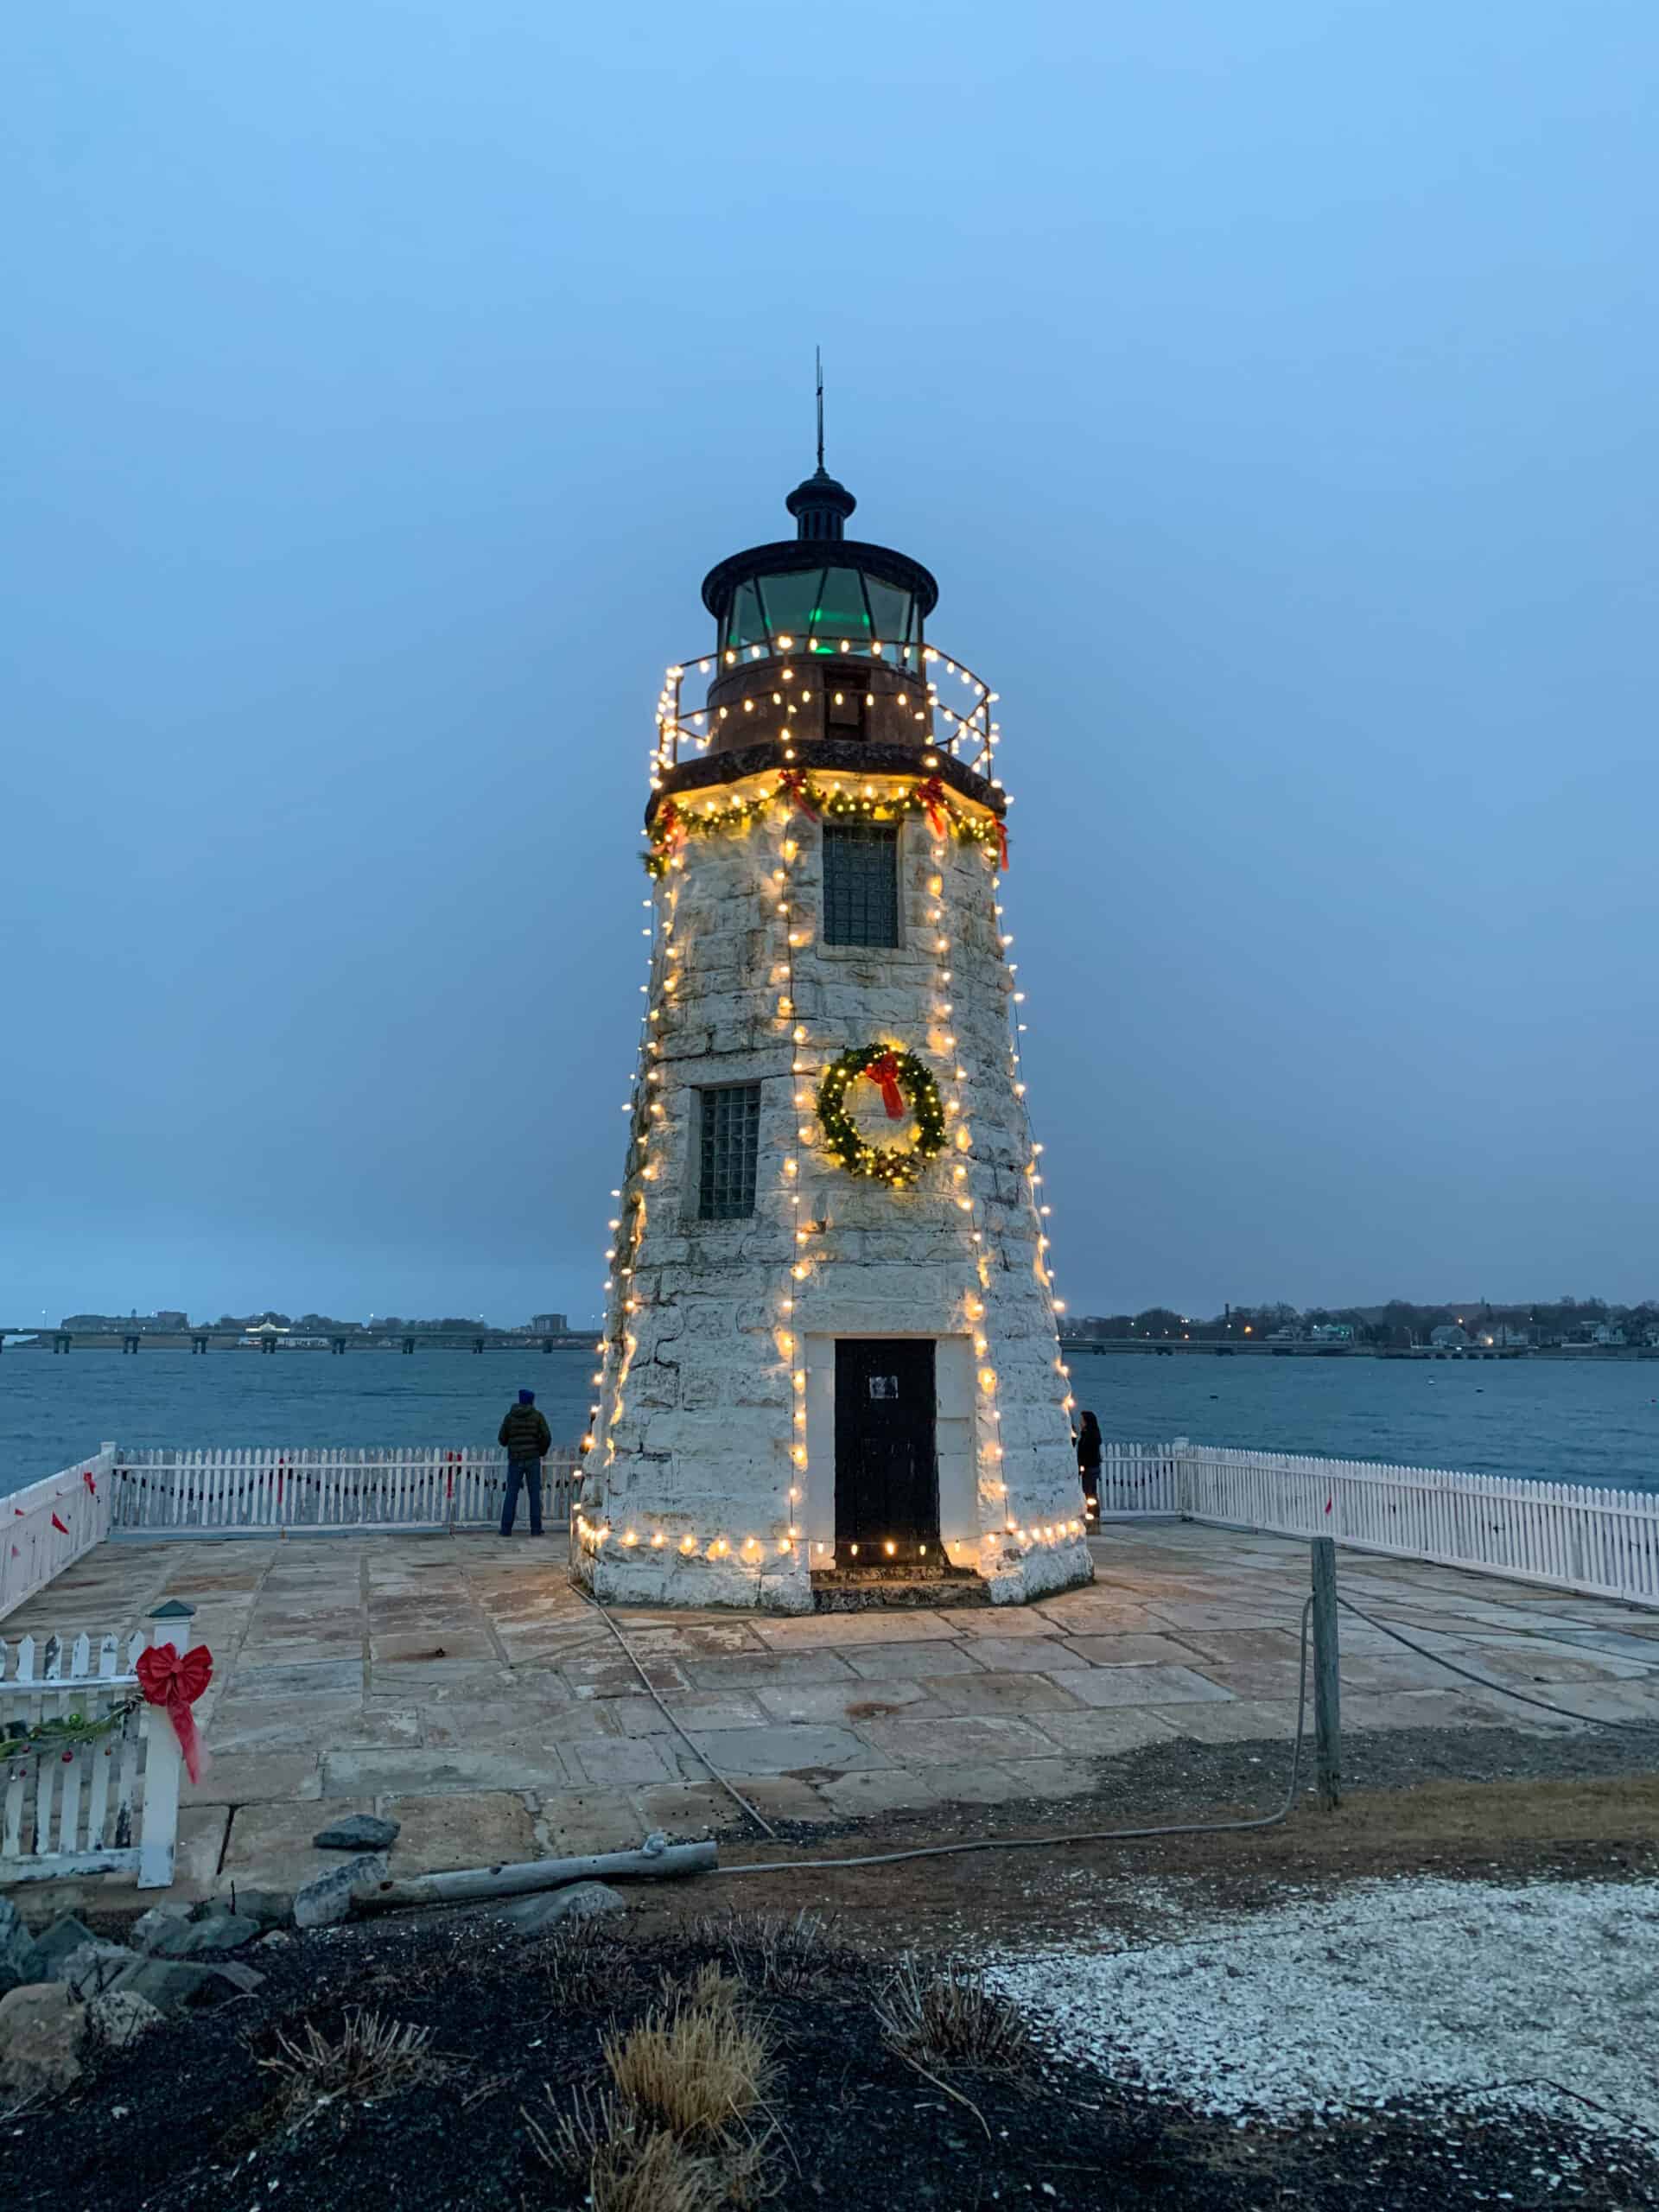 A white lighthouse with a black top decorated with white holiday lights and a wreath